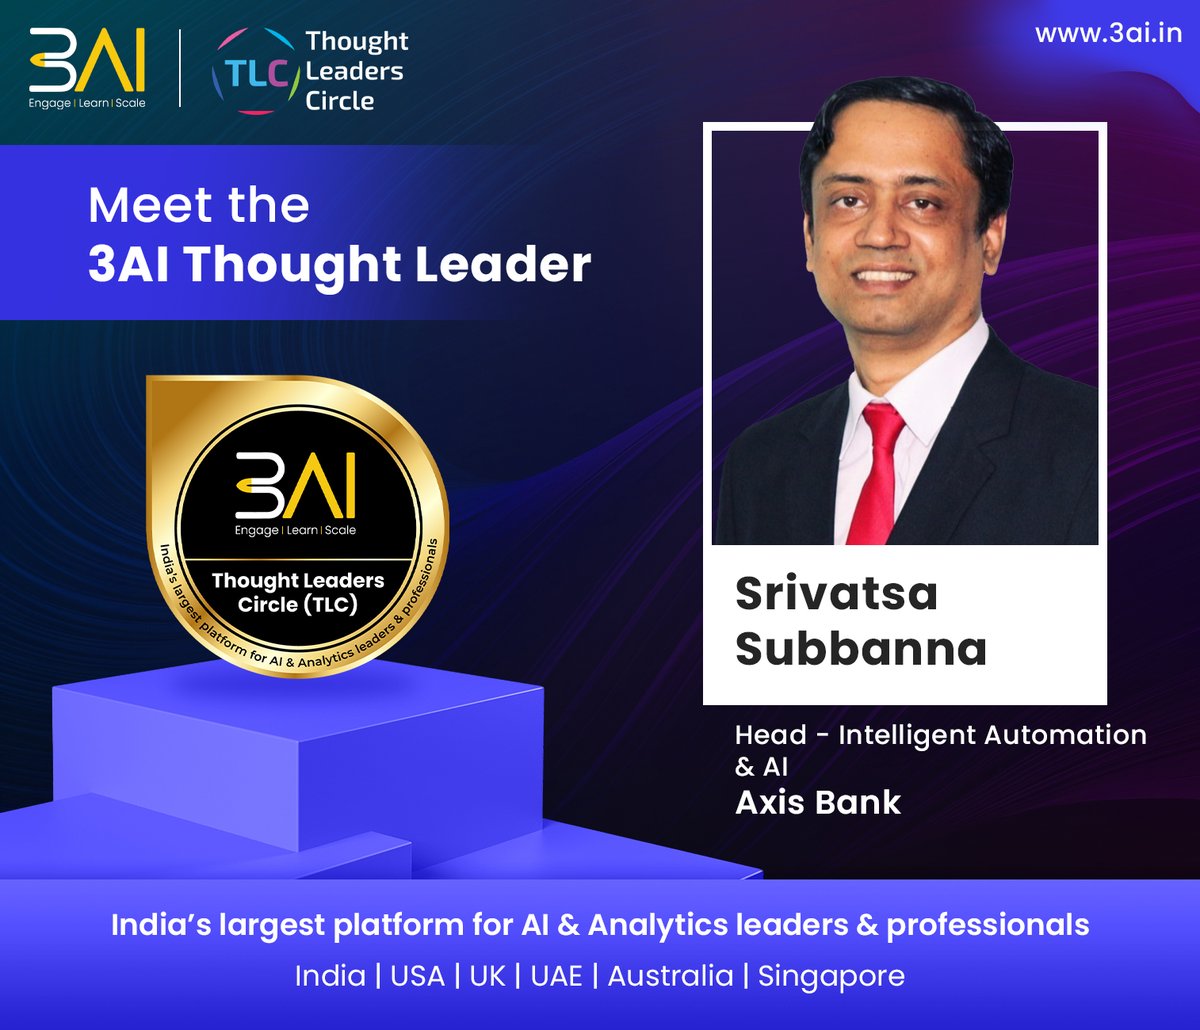 Meet our eminent 3AI Thought Leader.

Srivatsa Subbanna, Head - Intelligent Automation & AI, Axis Bank

Express your interest | Visit 3aiforums.com or Write to us: tlc@3ai.in

#ai #data #dataanalytics #datascience #artificialintelligence #thoughtleadership
@DhanrajaniS